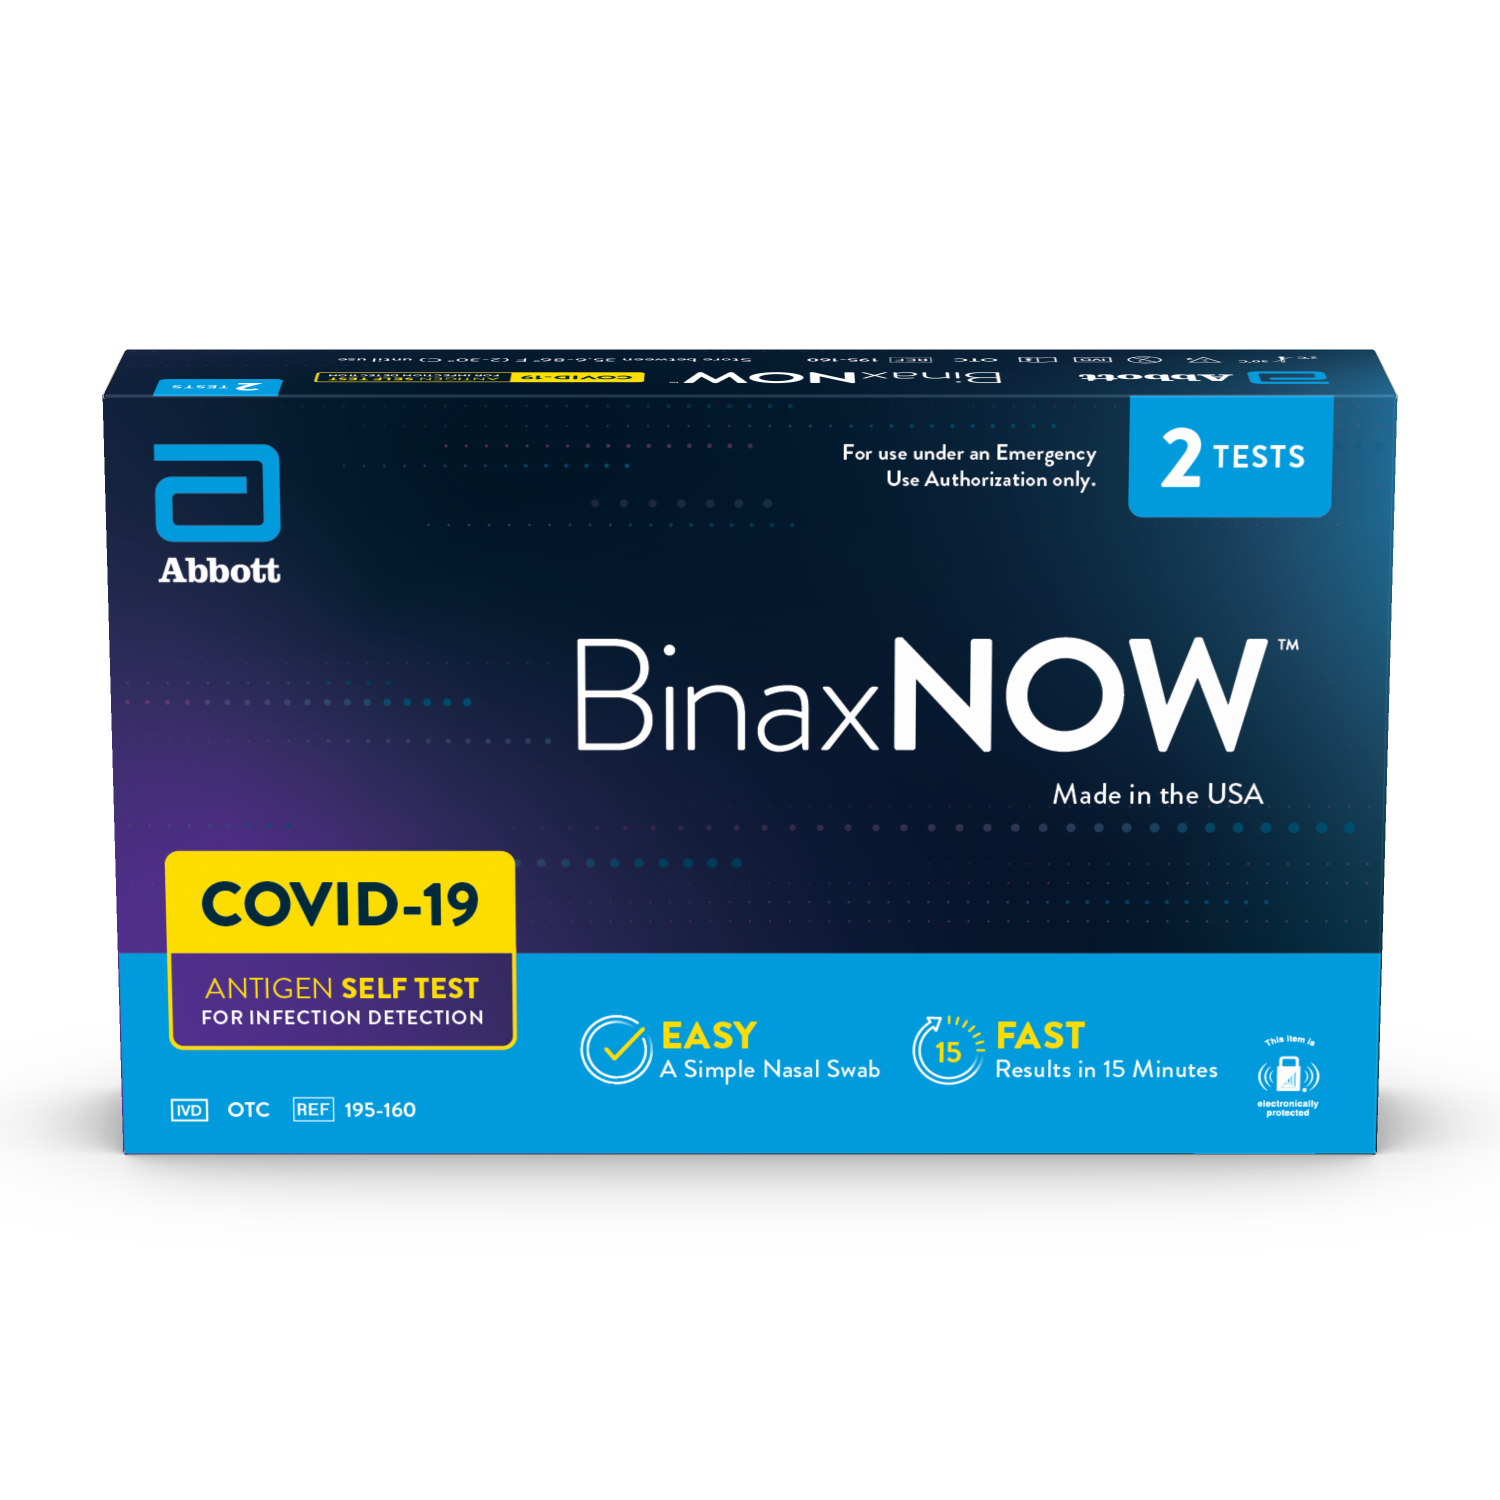 BinaxNOW COVID‐19 Antigen Self Test, 1 Pack, Double, 2-count, At Home COVID-19 Test, 2 Tests - image 1 of 11